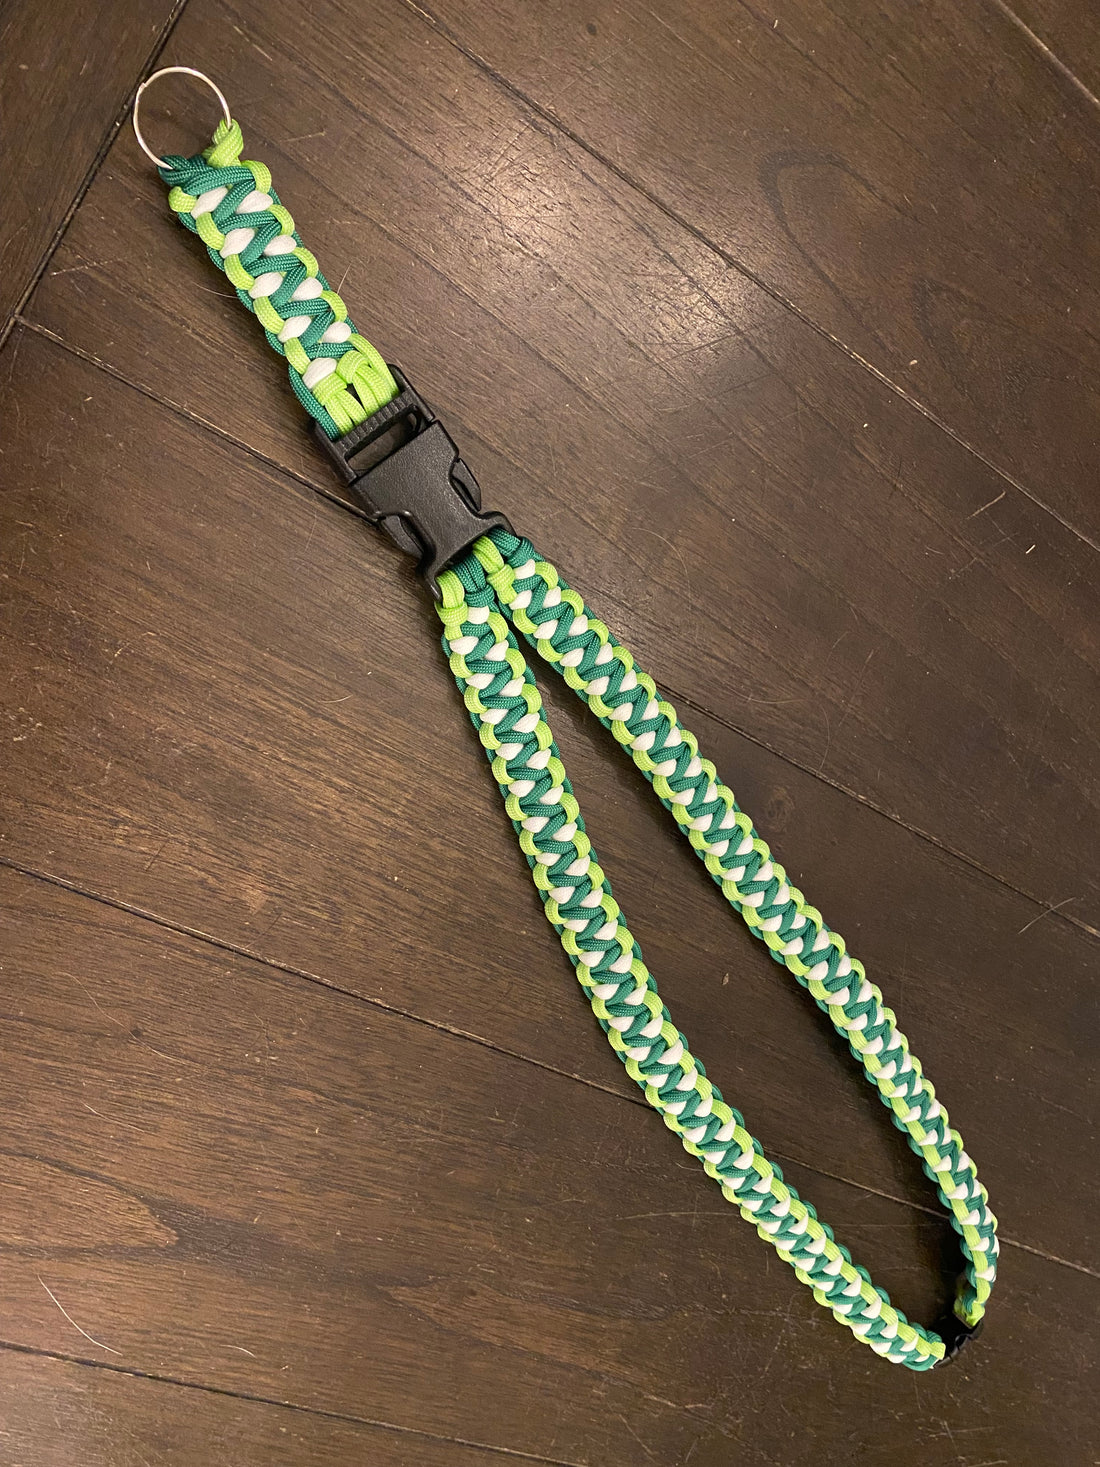 New Lanyard Variant: Soloman's Dragon weave lanyards now available!